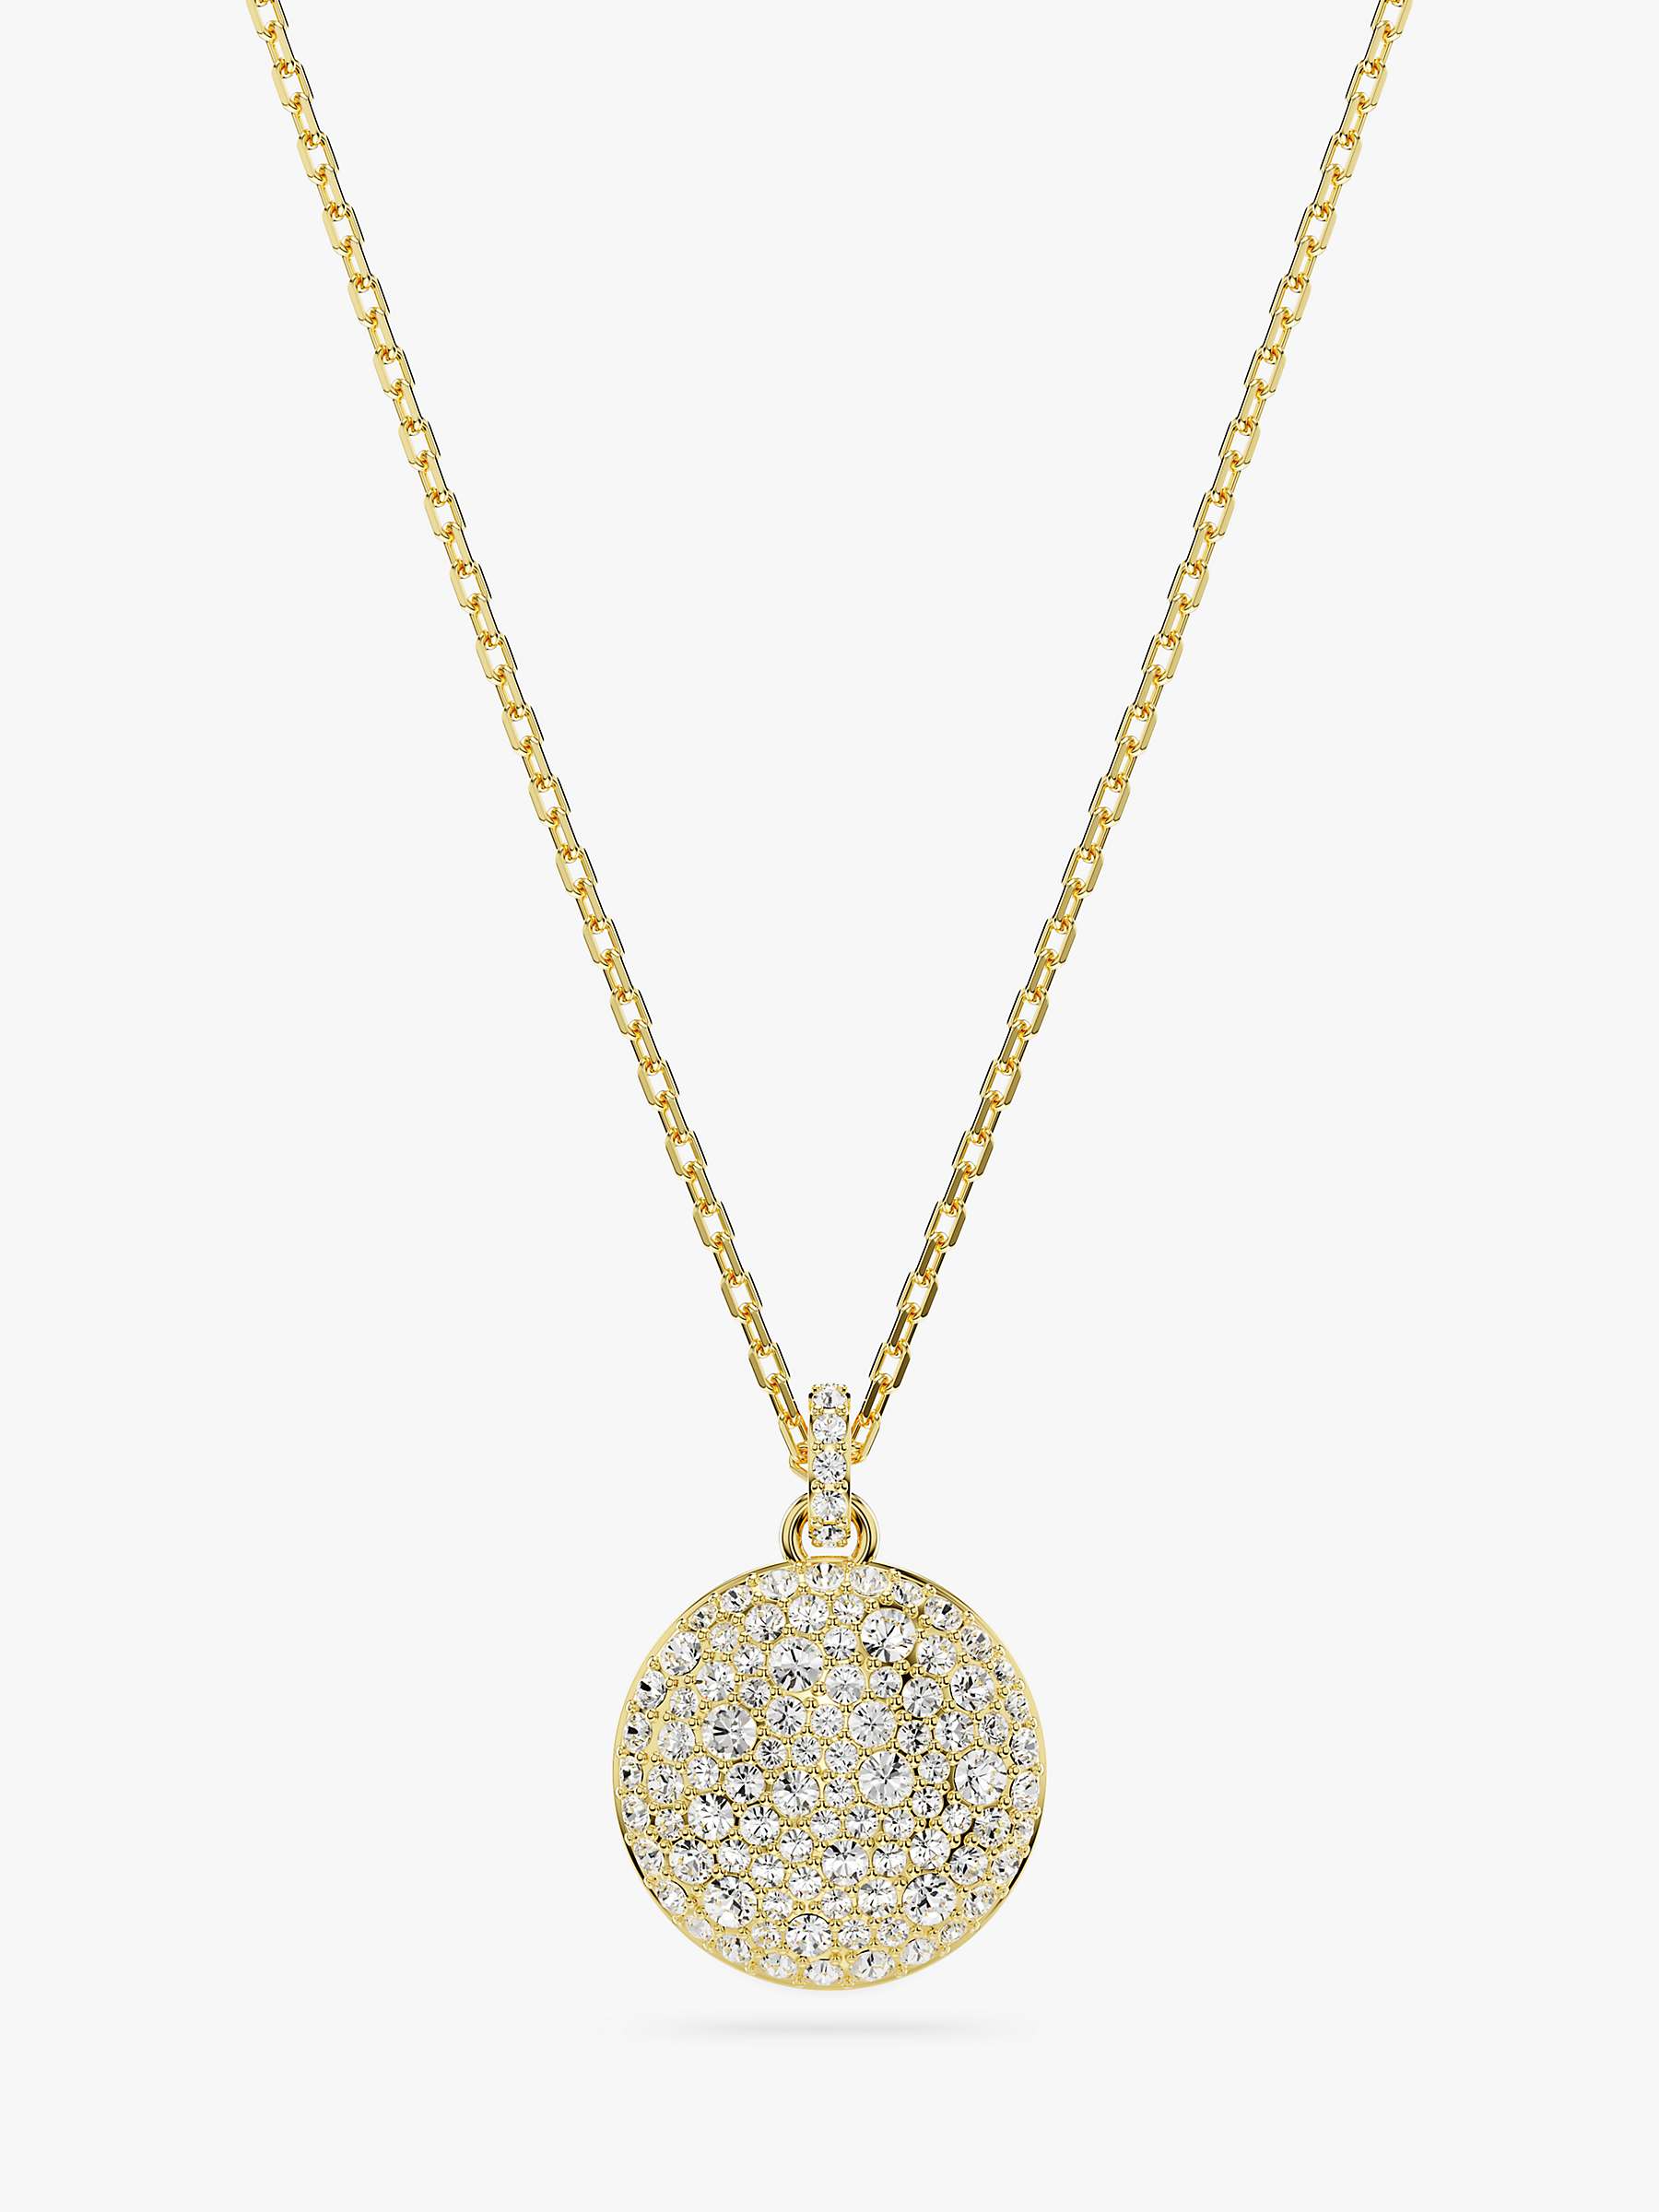 Buy Swarovski Meteora Double Chain Pave Crystal Pendant Necklace Online at johnlewis.com